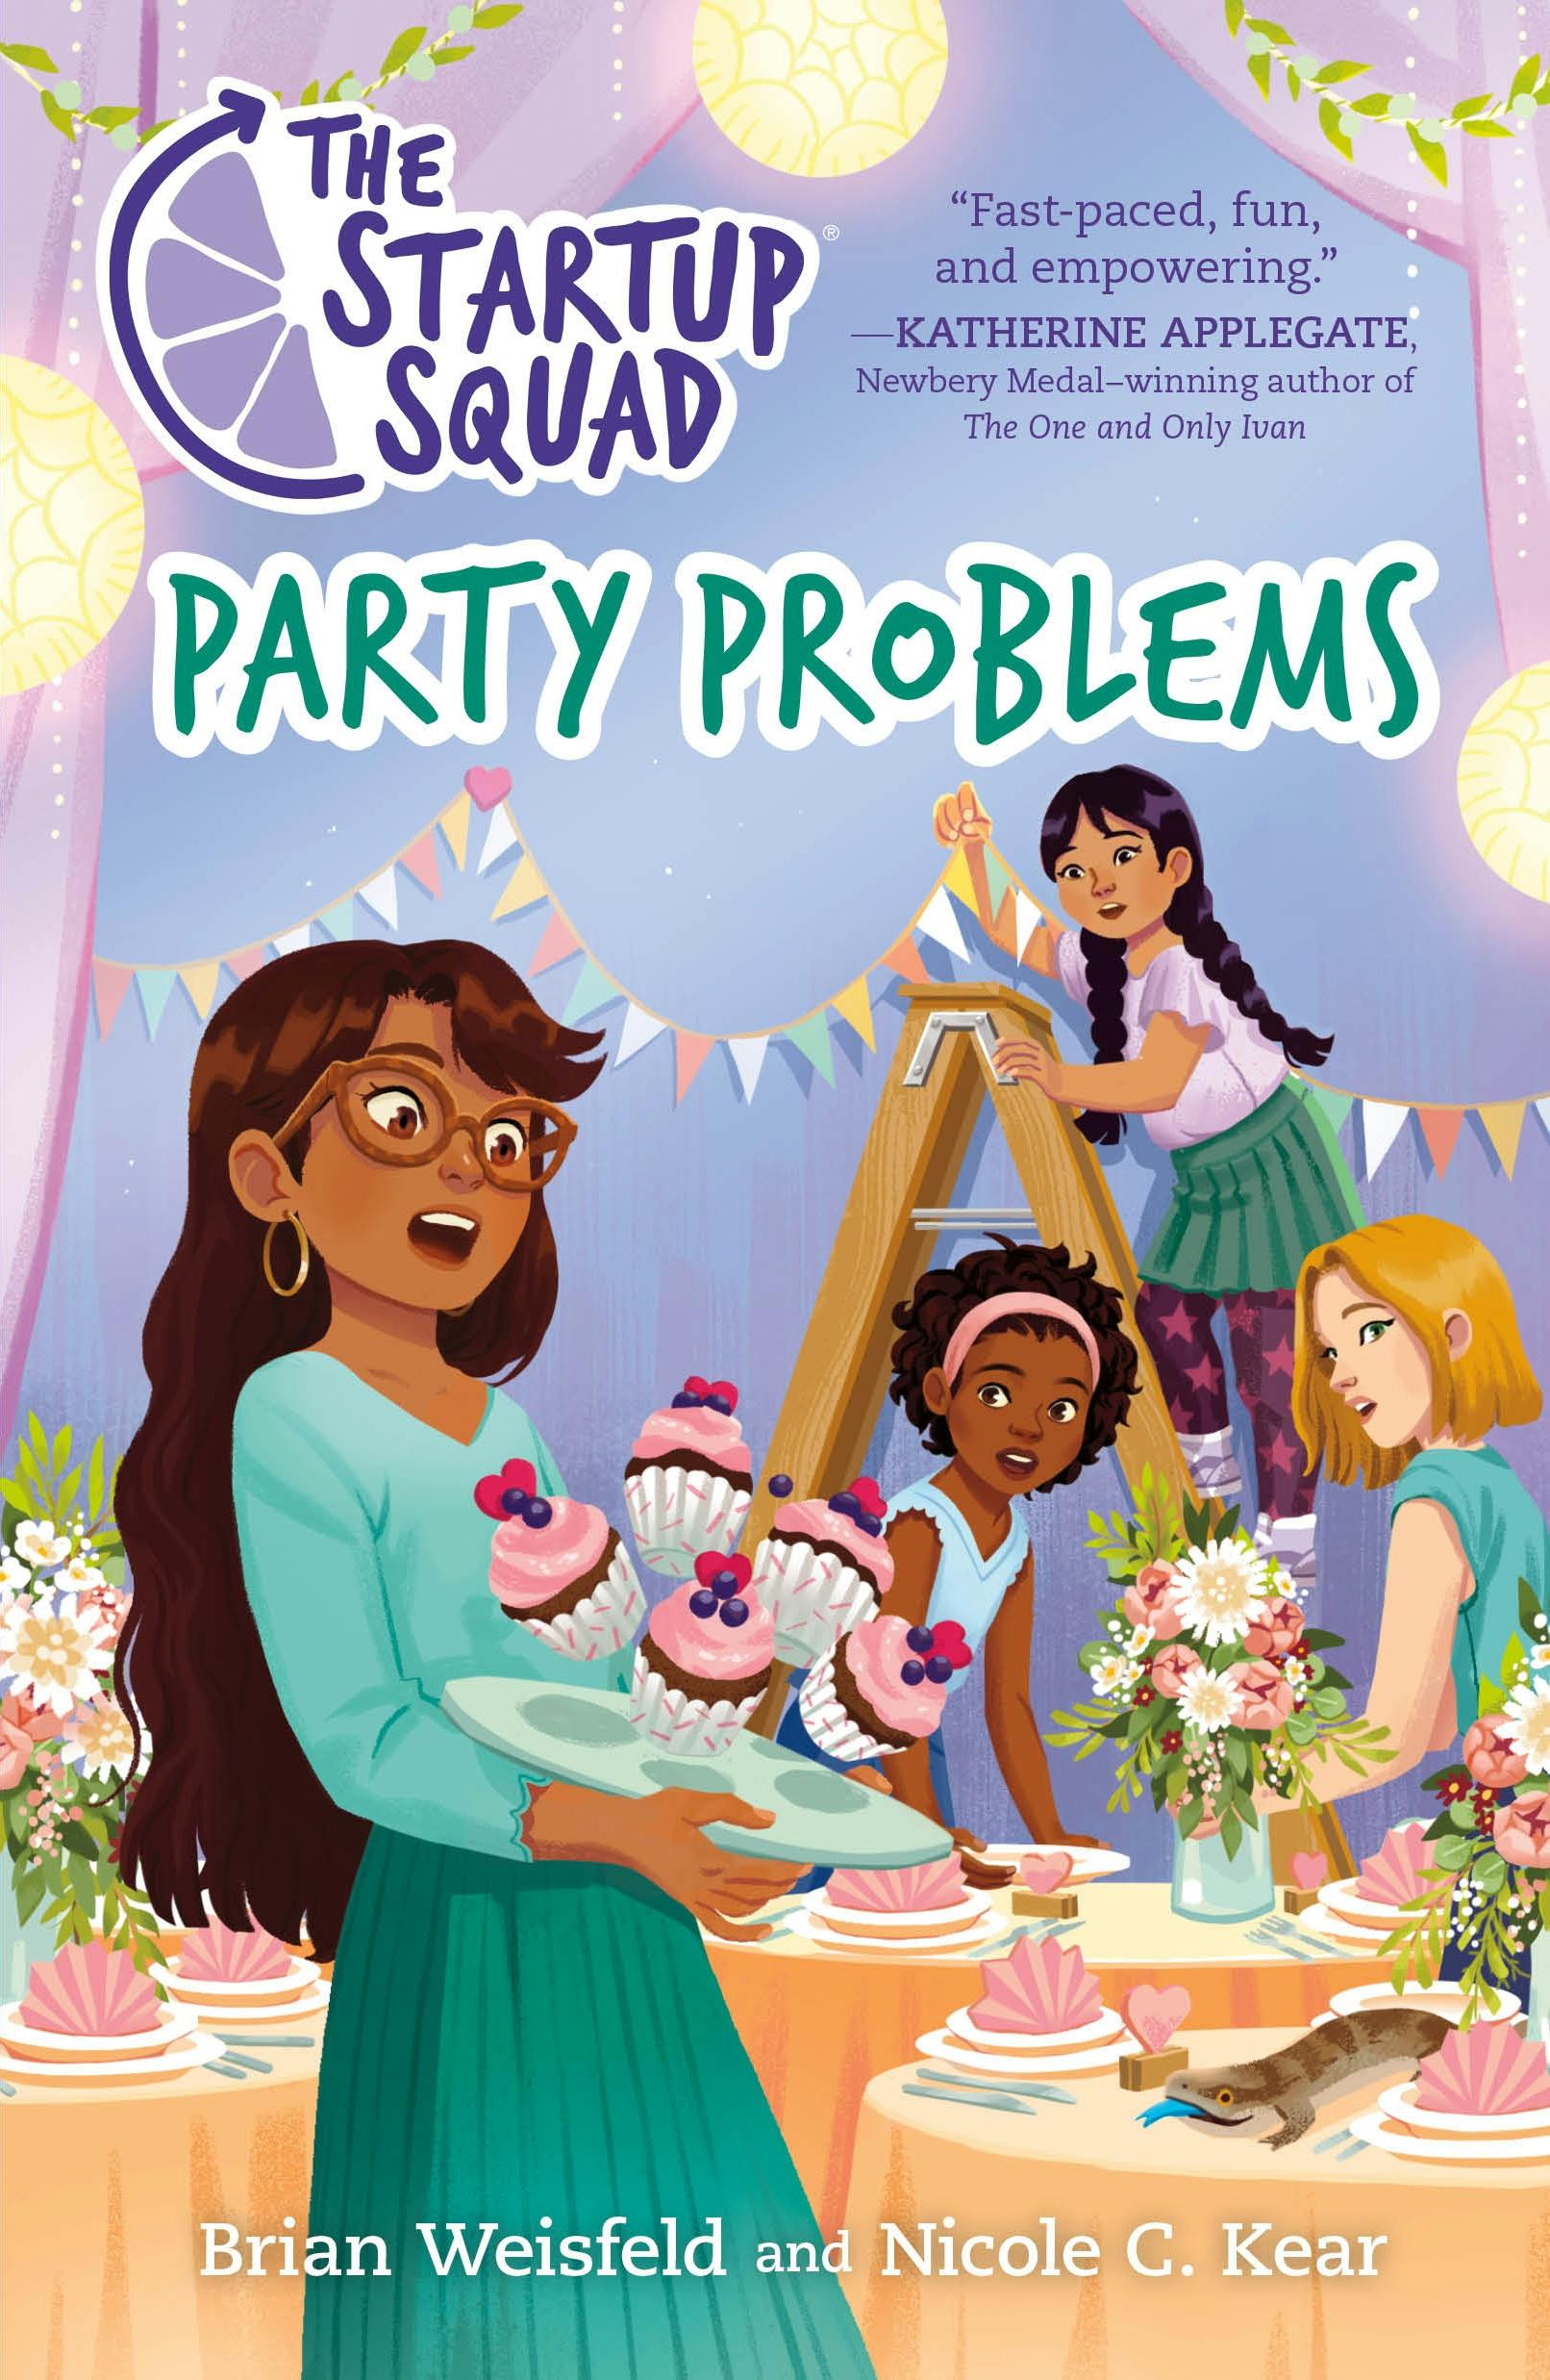 Image of The Startup Squad: Party Problems